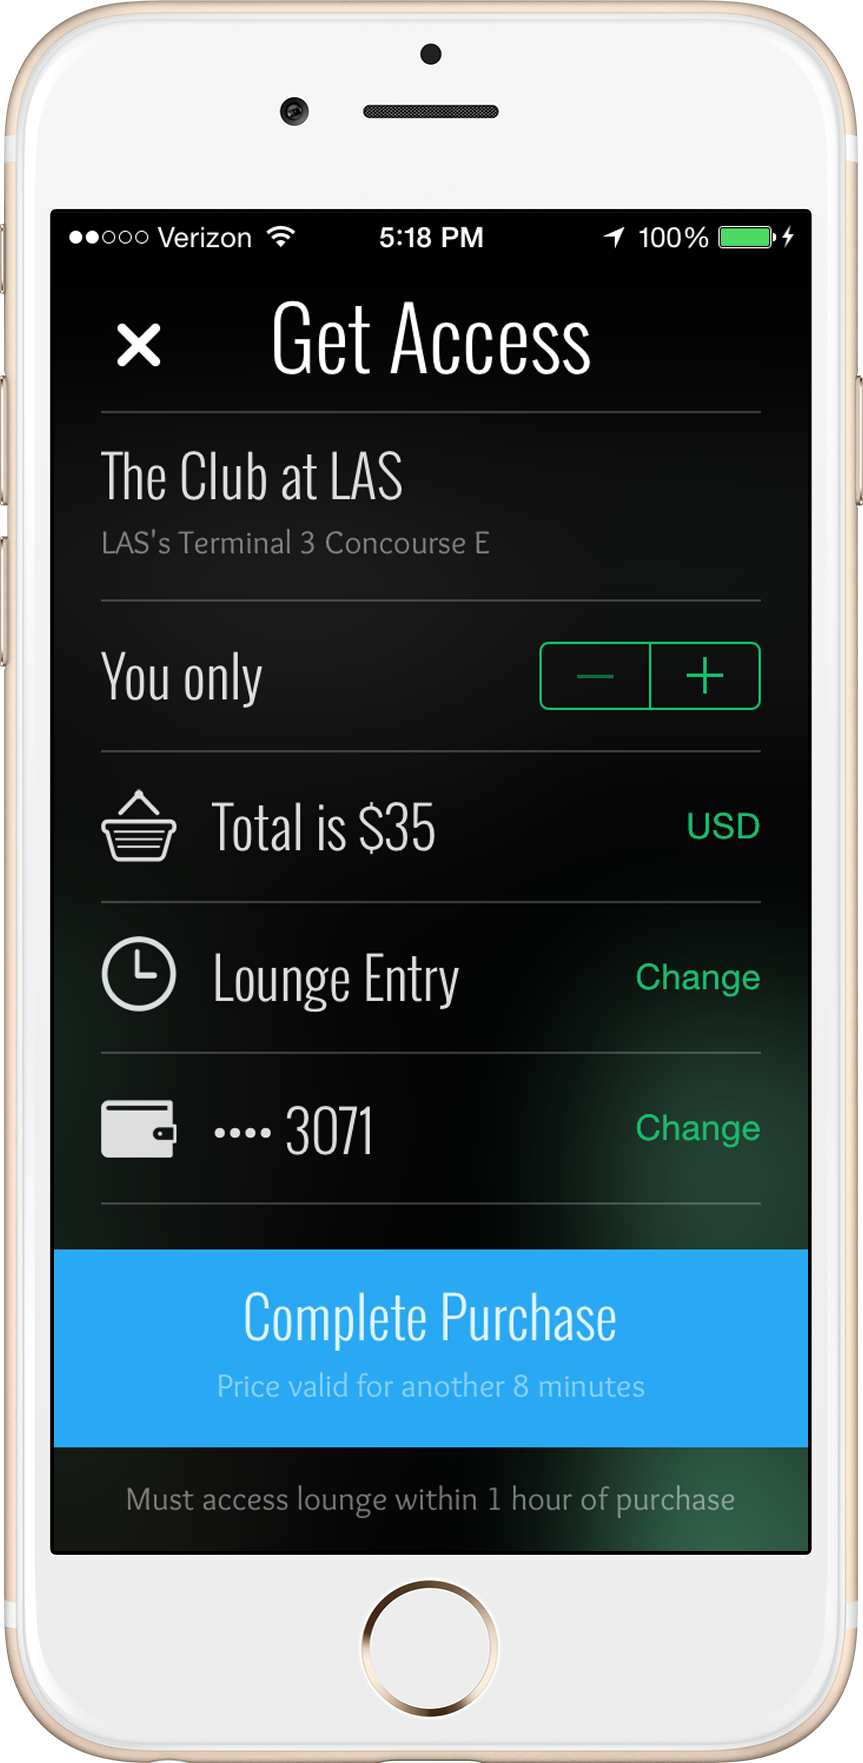 The Club checkout process in LoungeBuddy